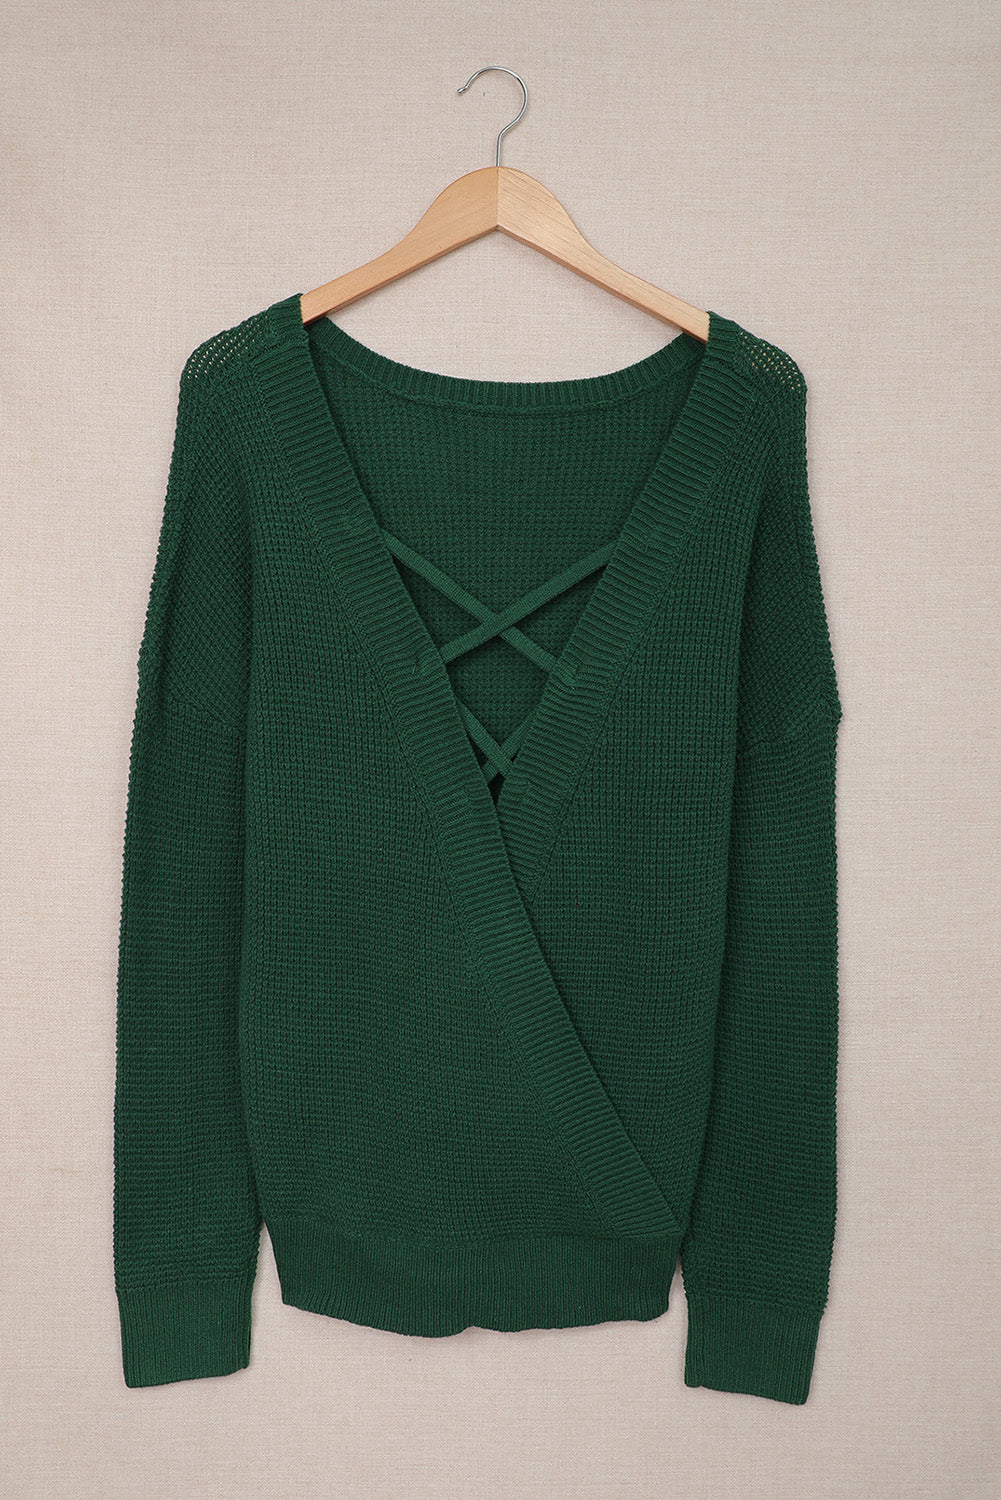 Green Cross Back Hollow-out Sweater Sweaters & Cardigans JT's Designer Fashion